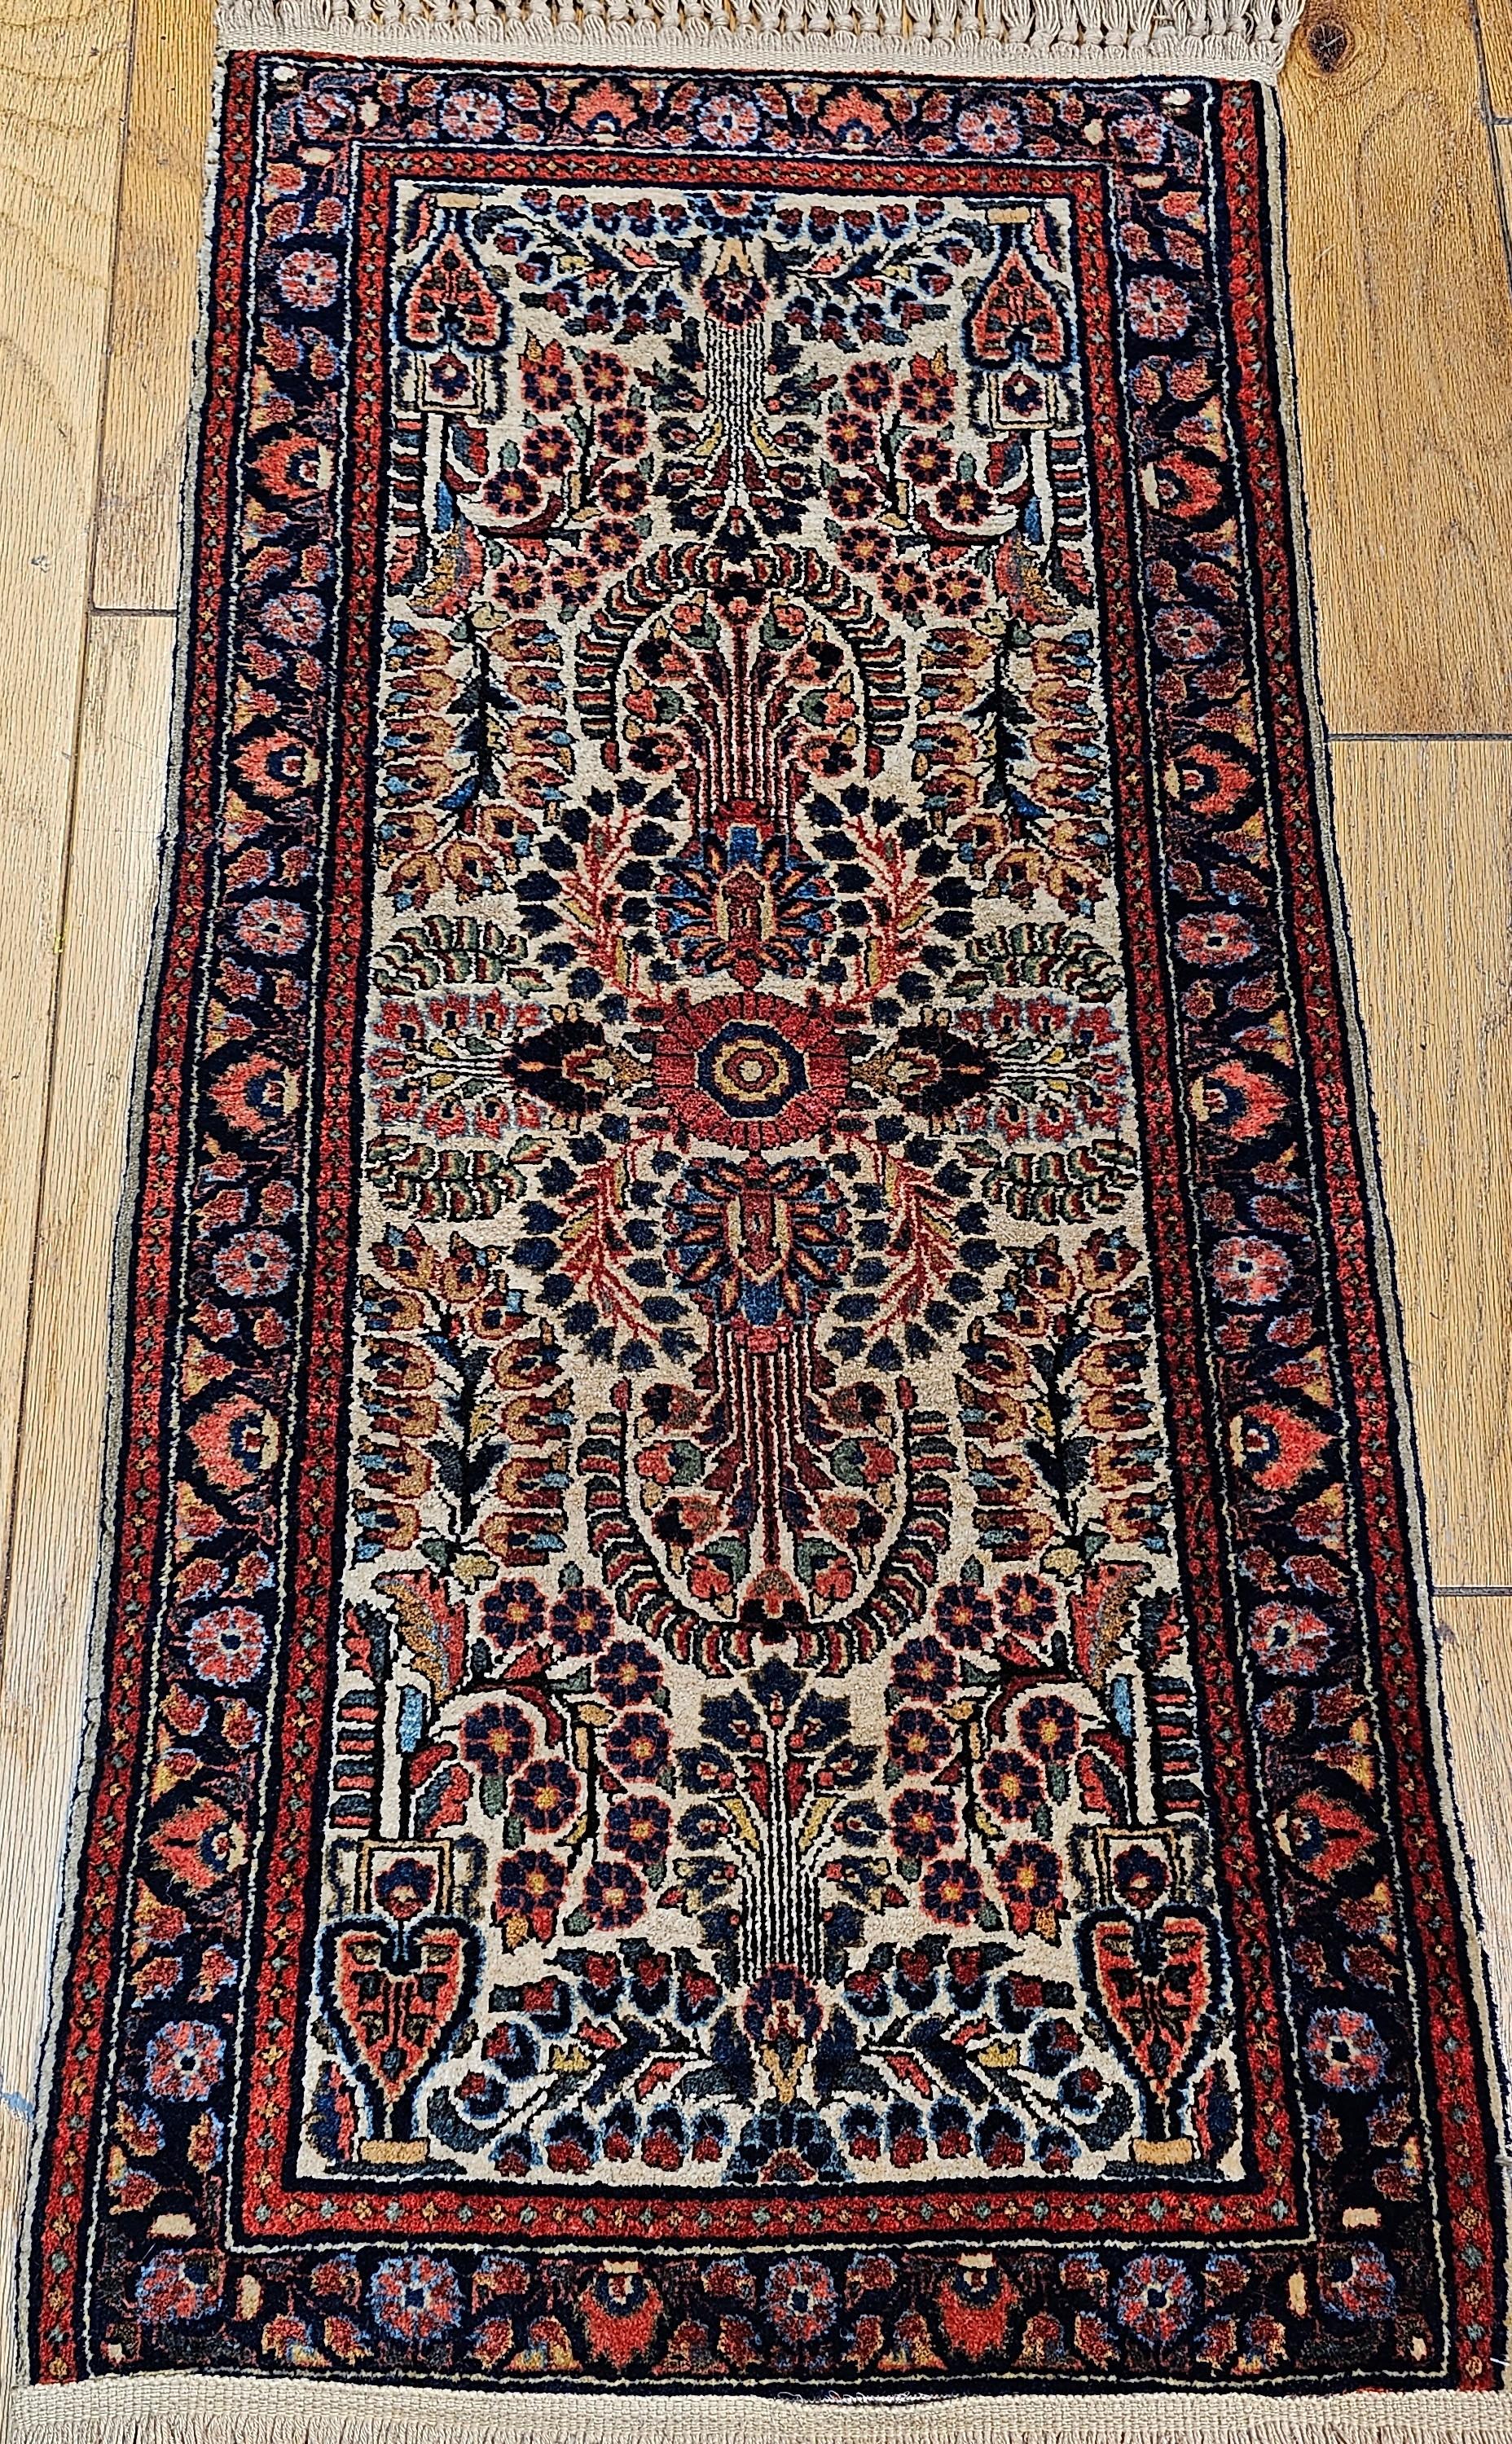 Vintage Ivory color Persian Sarouk area rug from the second quarter of the 1900s.  The ivory color Sarouk is very rare and extremely desirable.  The rug has an allover pattern with designs in yellow, blue, red, pink and green.
Dimensions:  2’ x